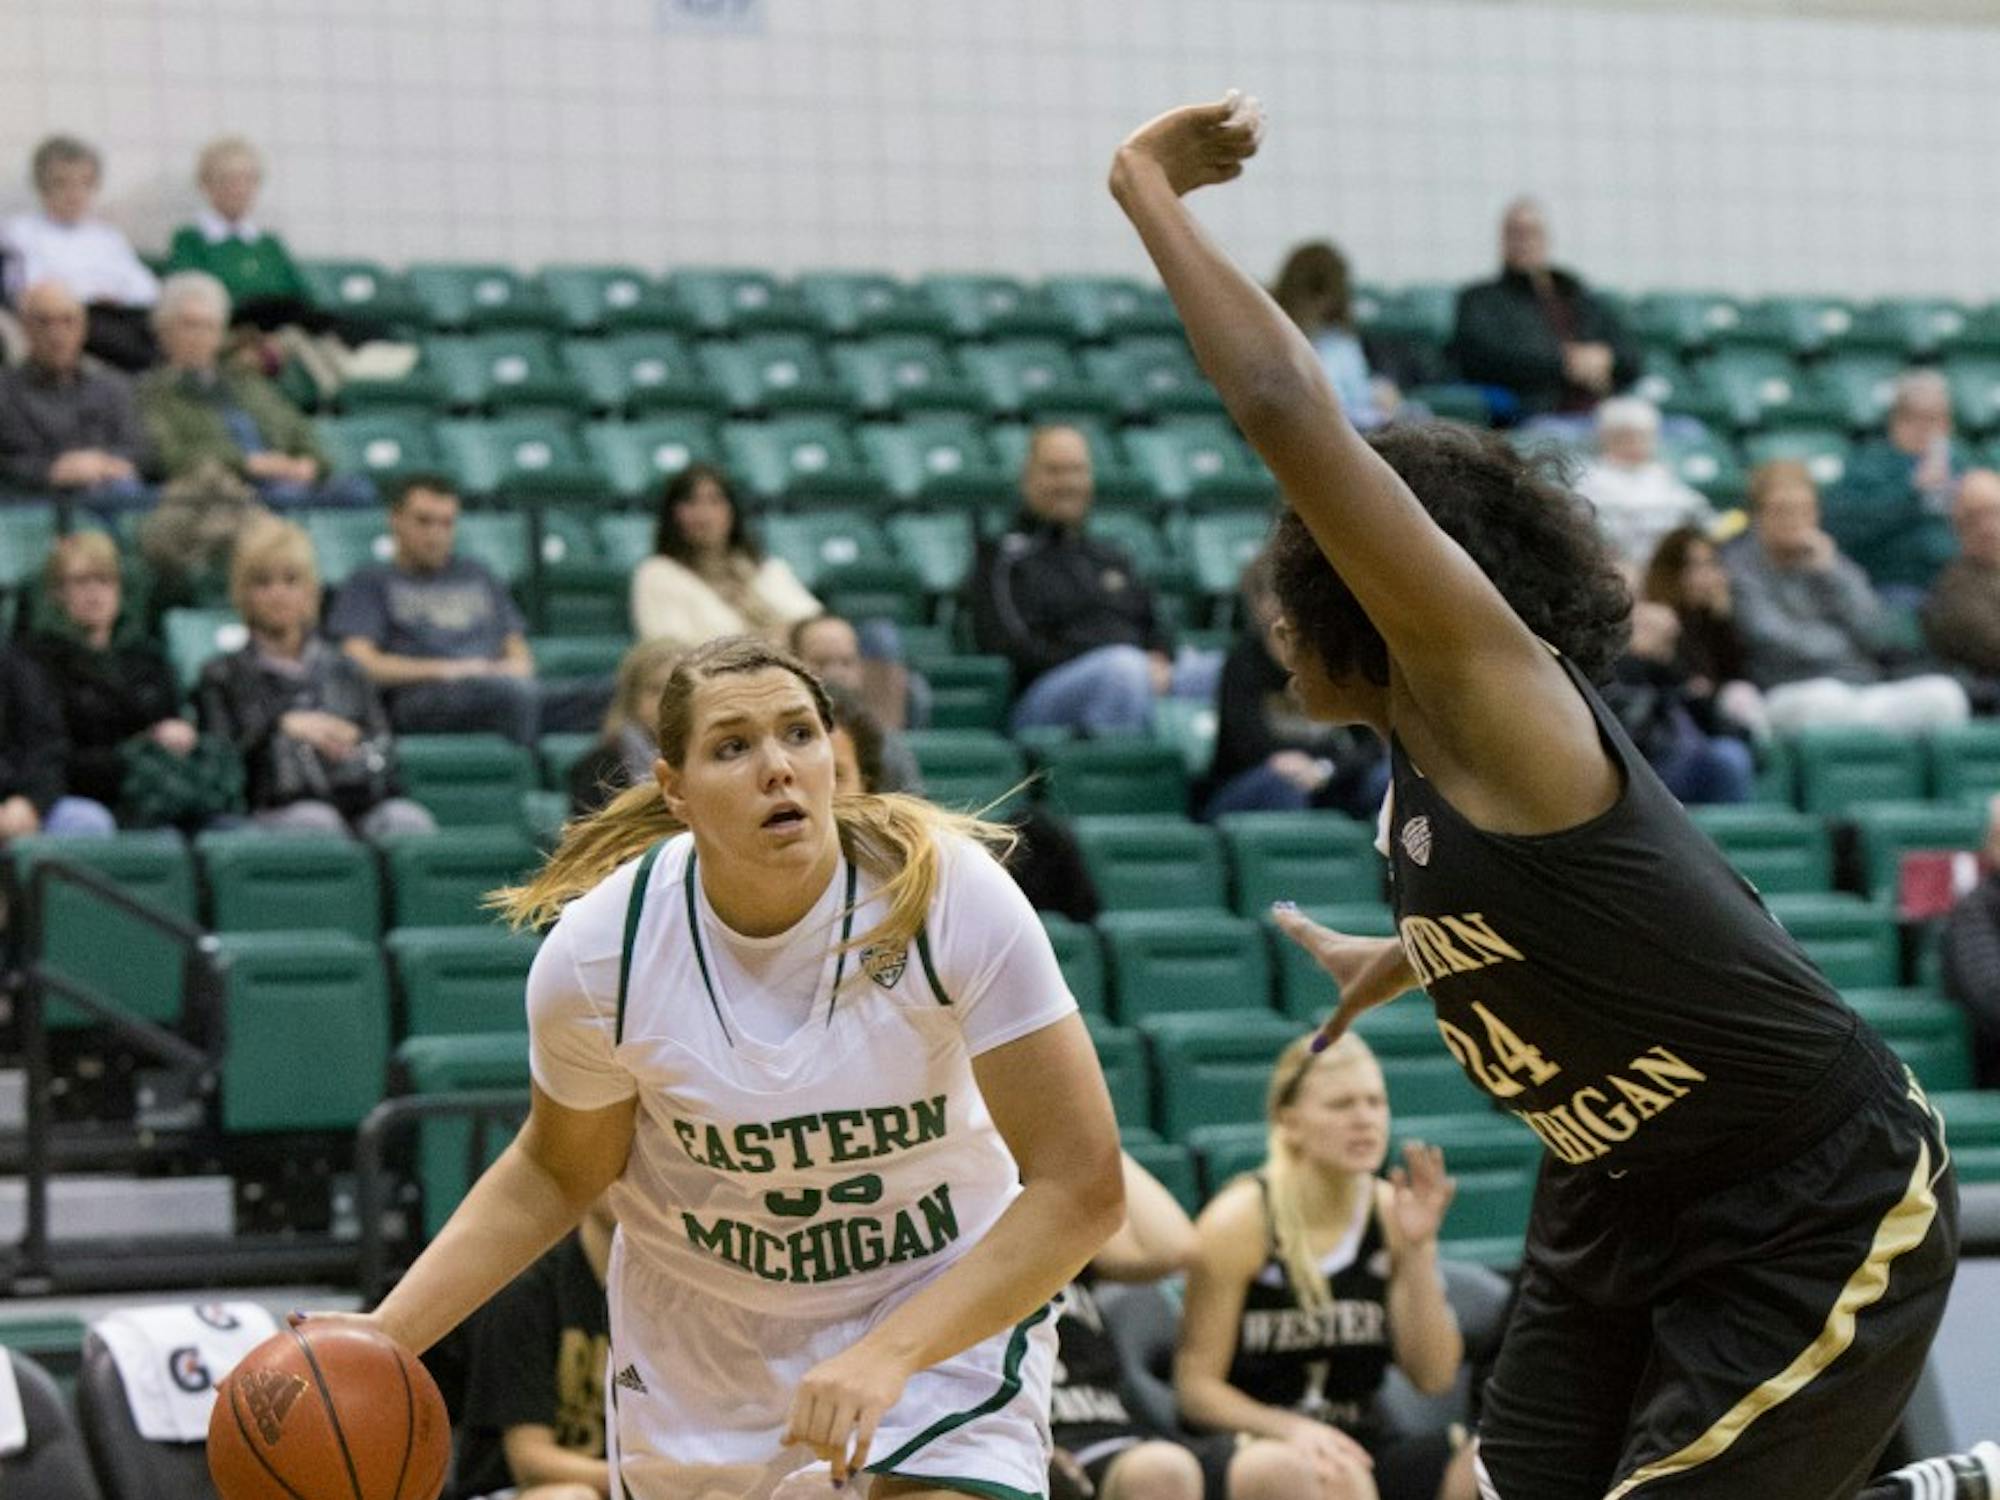 EMU forward Olivia Fouty (33) drives past WMU's Miracle Woods (24) in Eastern Michigan's 83-77 win over Western Michigan Wednesday night. Fouty had 14 points.